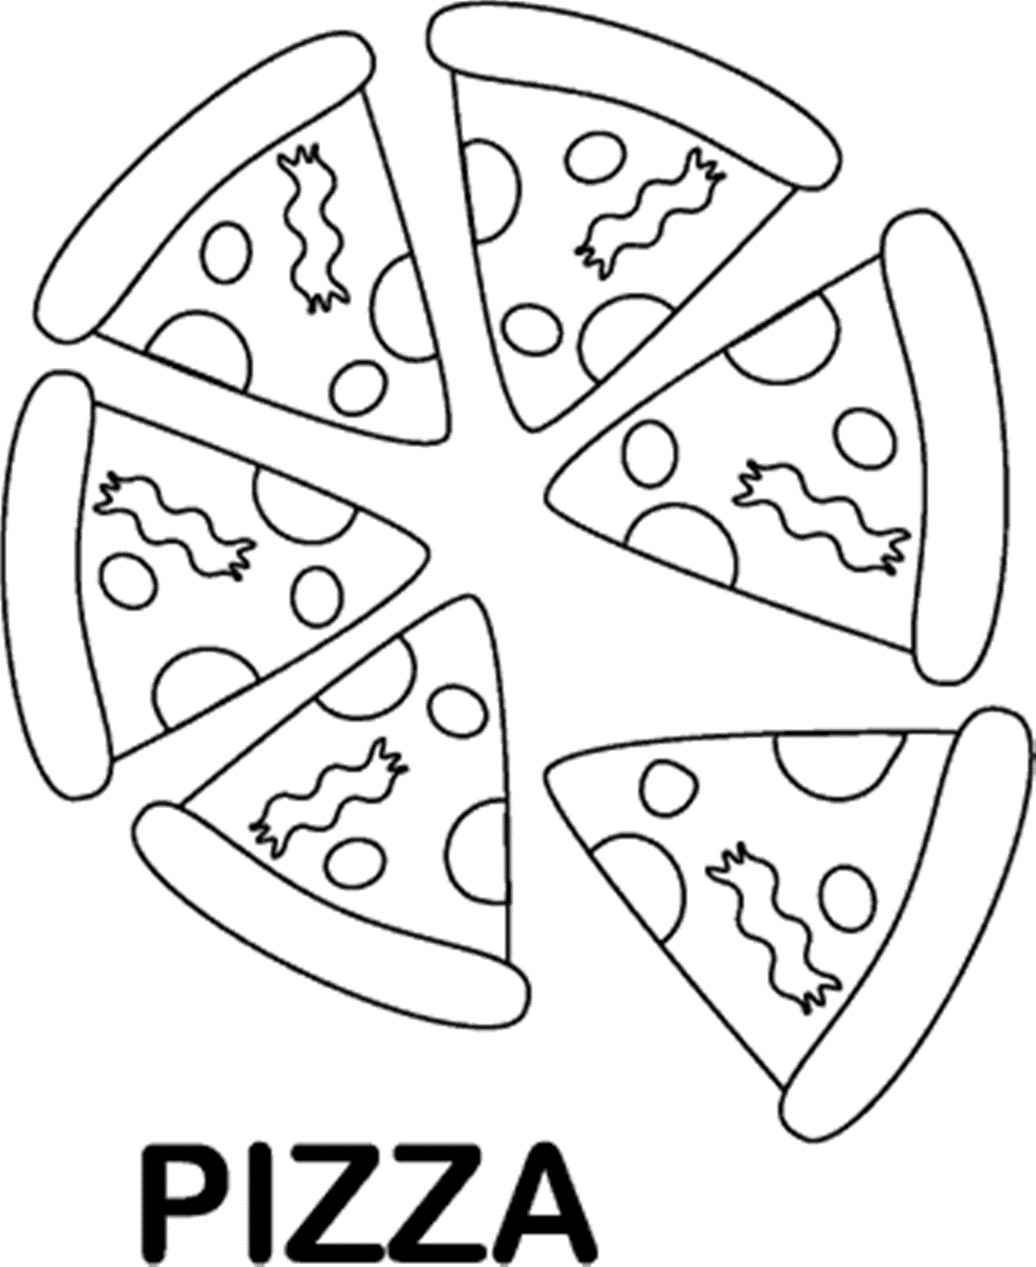 free-pizza-coloring-pages-download-free-pizza-coloring-pages-png